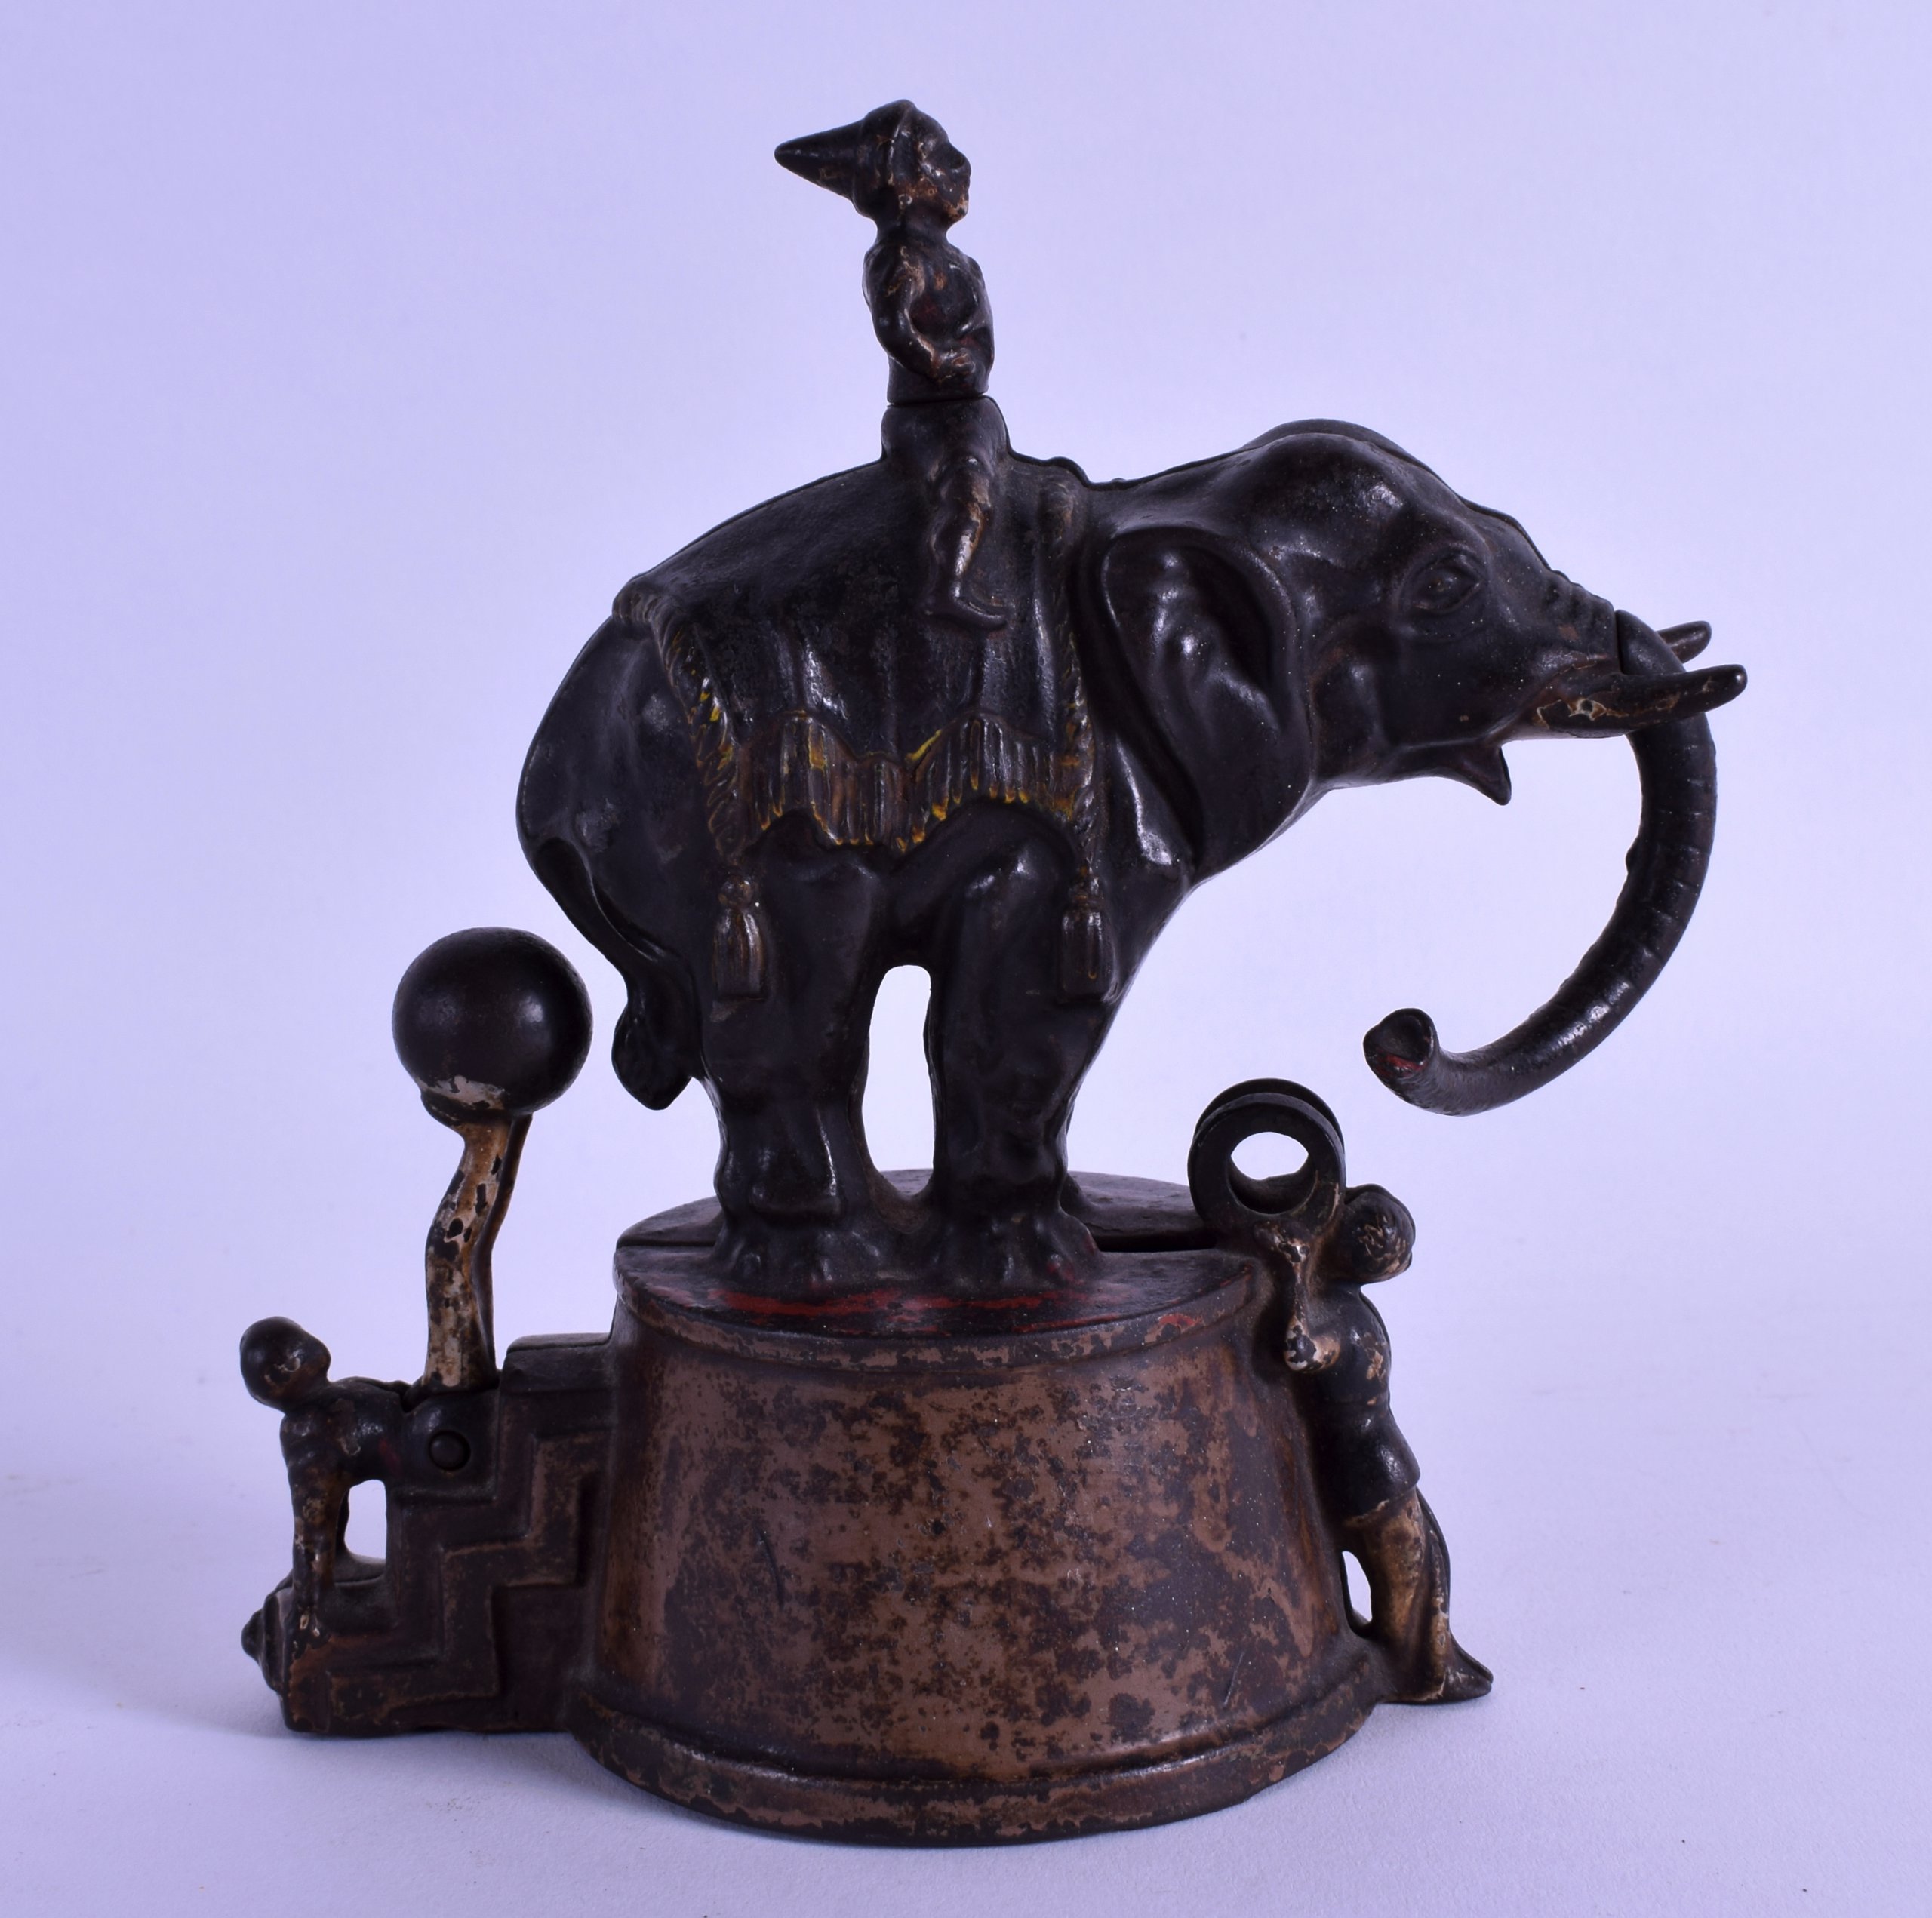 A GOOD AMERICAN ANTIQUE CAST IRON MONEY BANK in the form of a male seated upon an elephant. 15.5